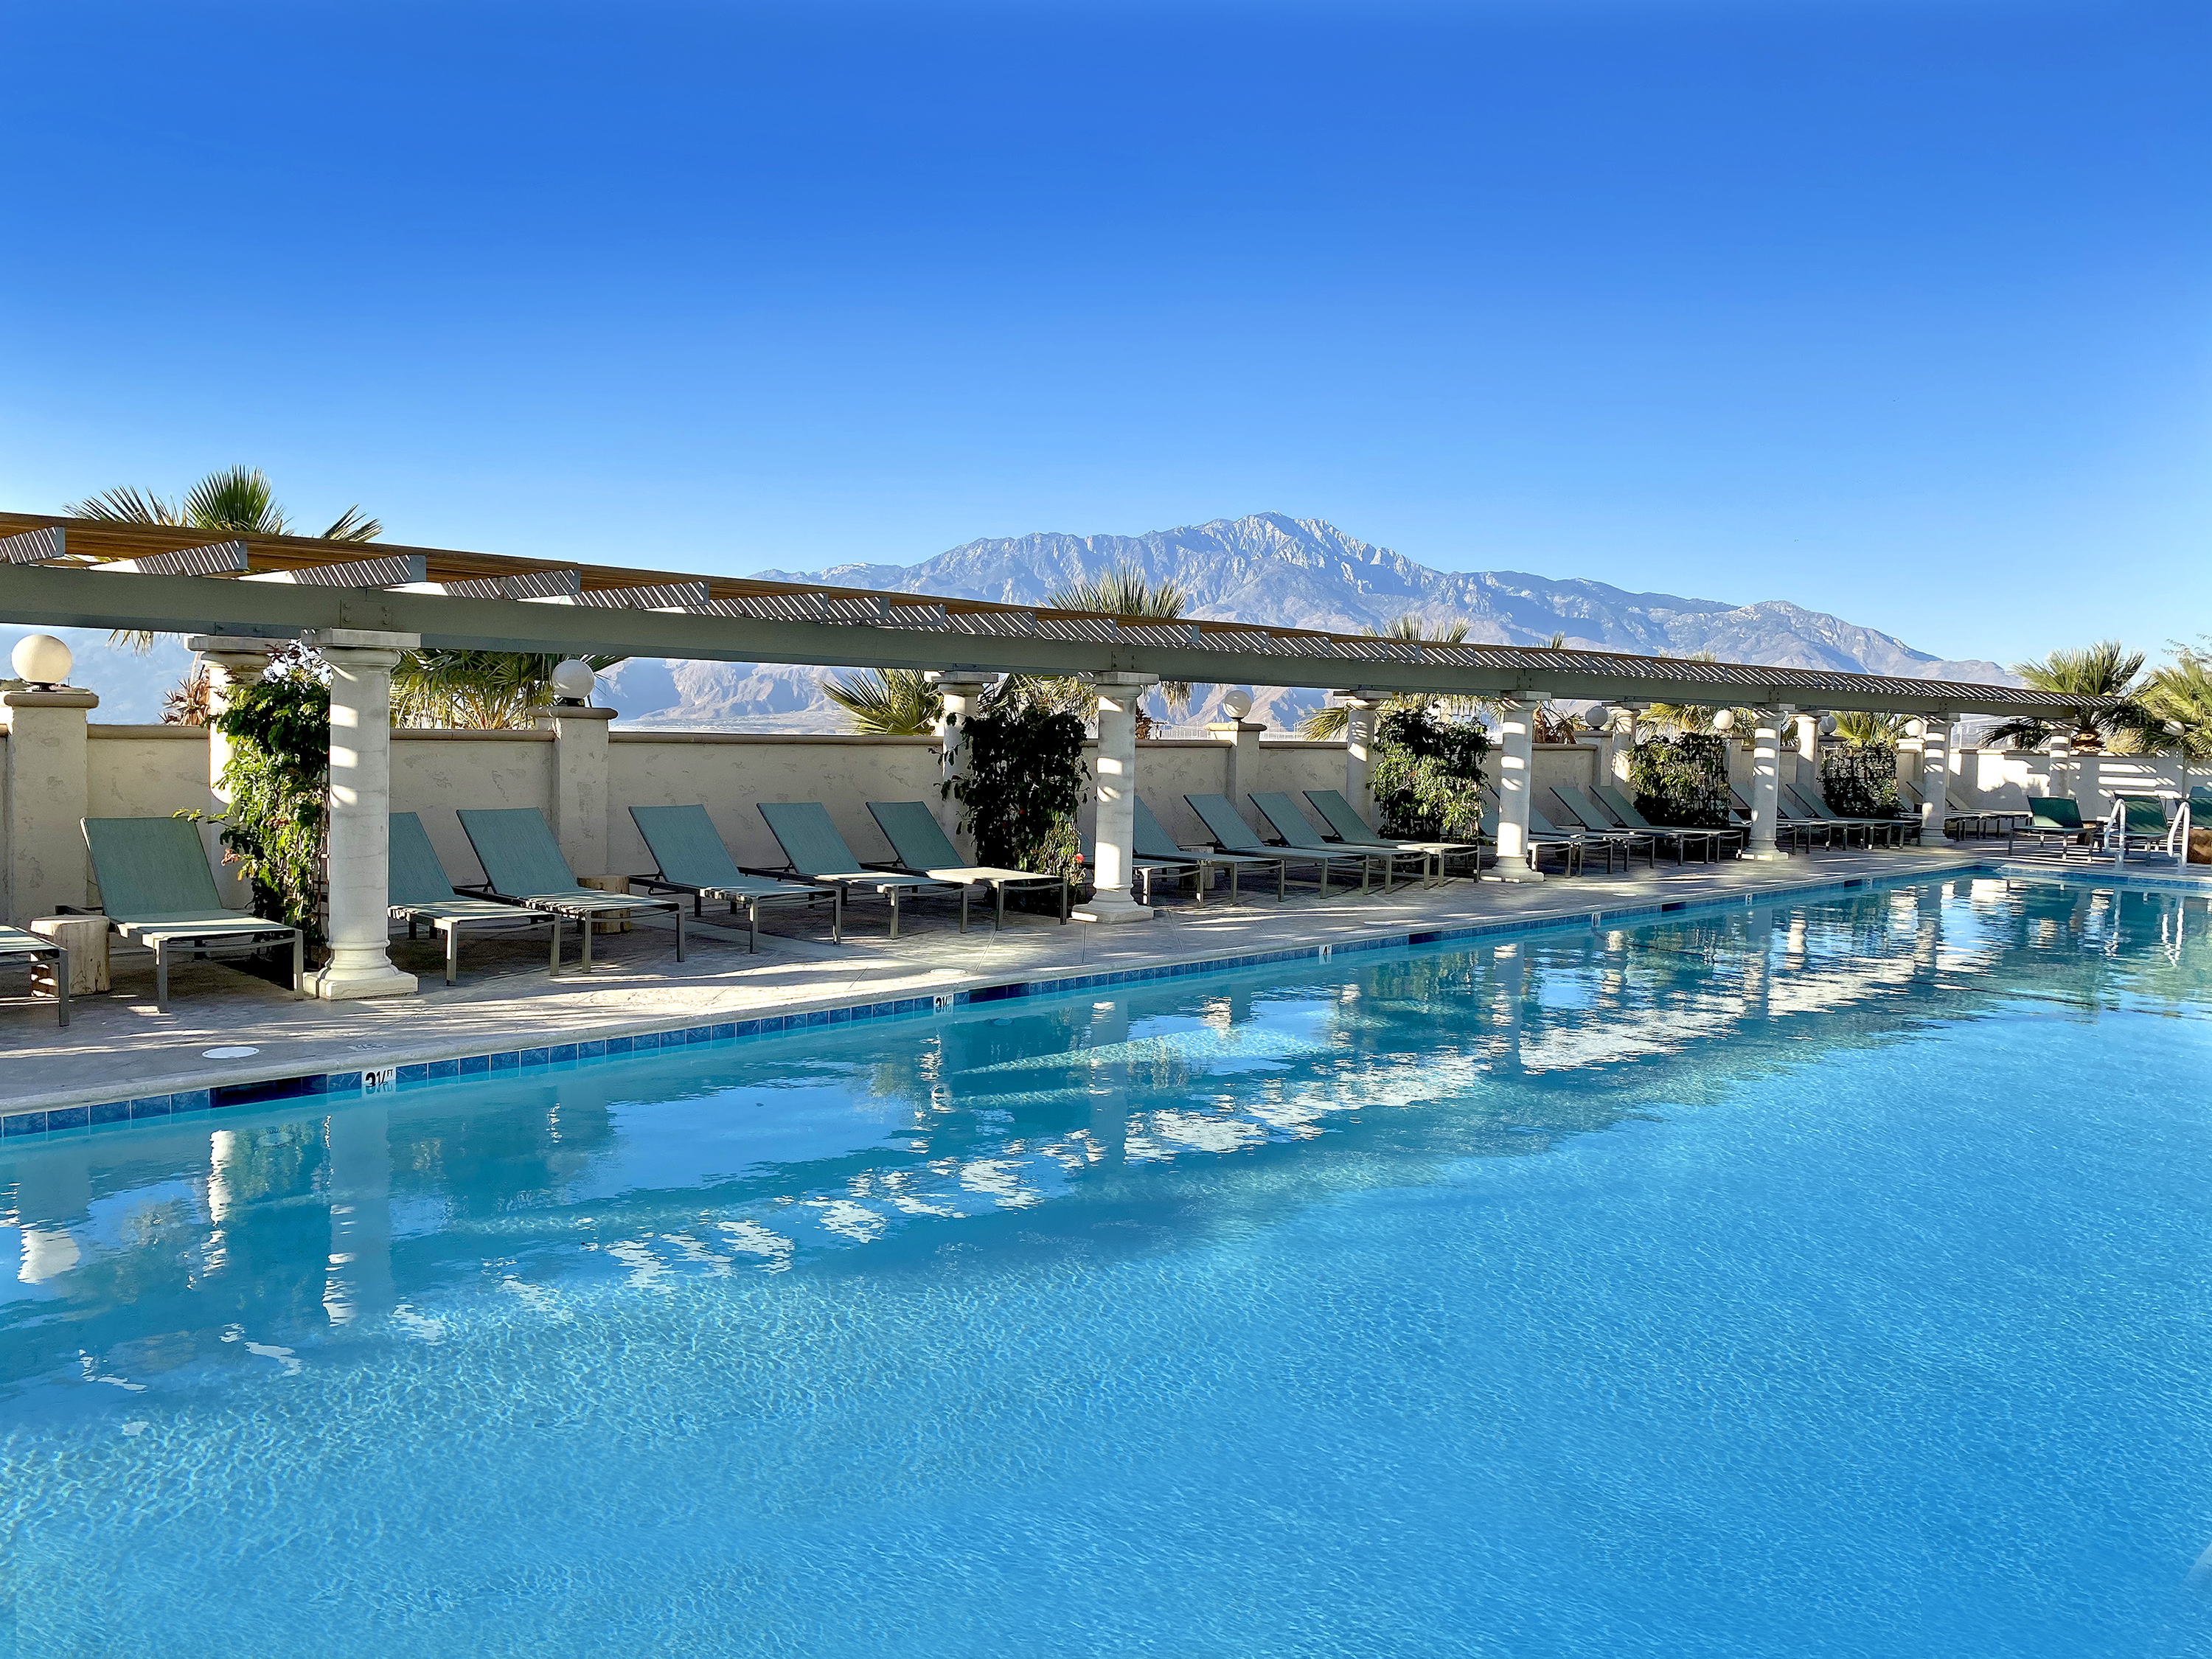 Review The Azure Palm Springs Has In-Room Hot Springs Tubs image